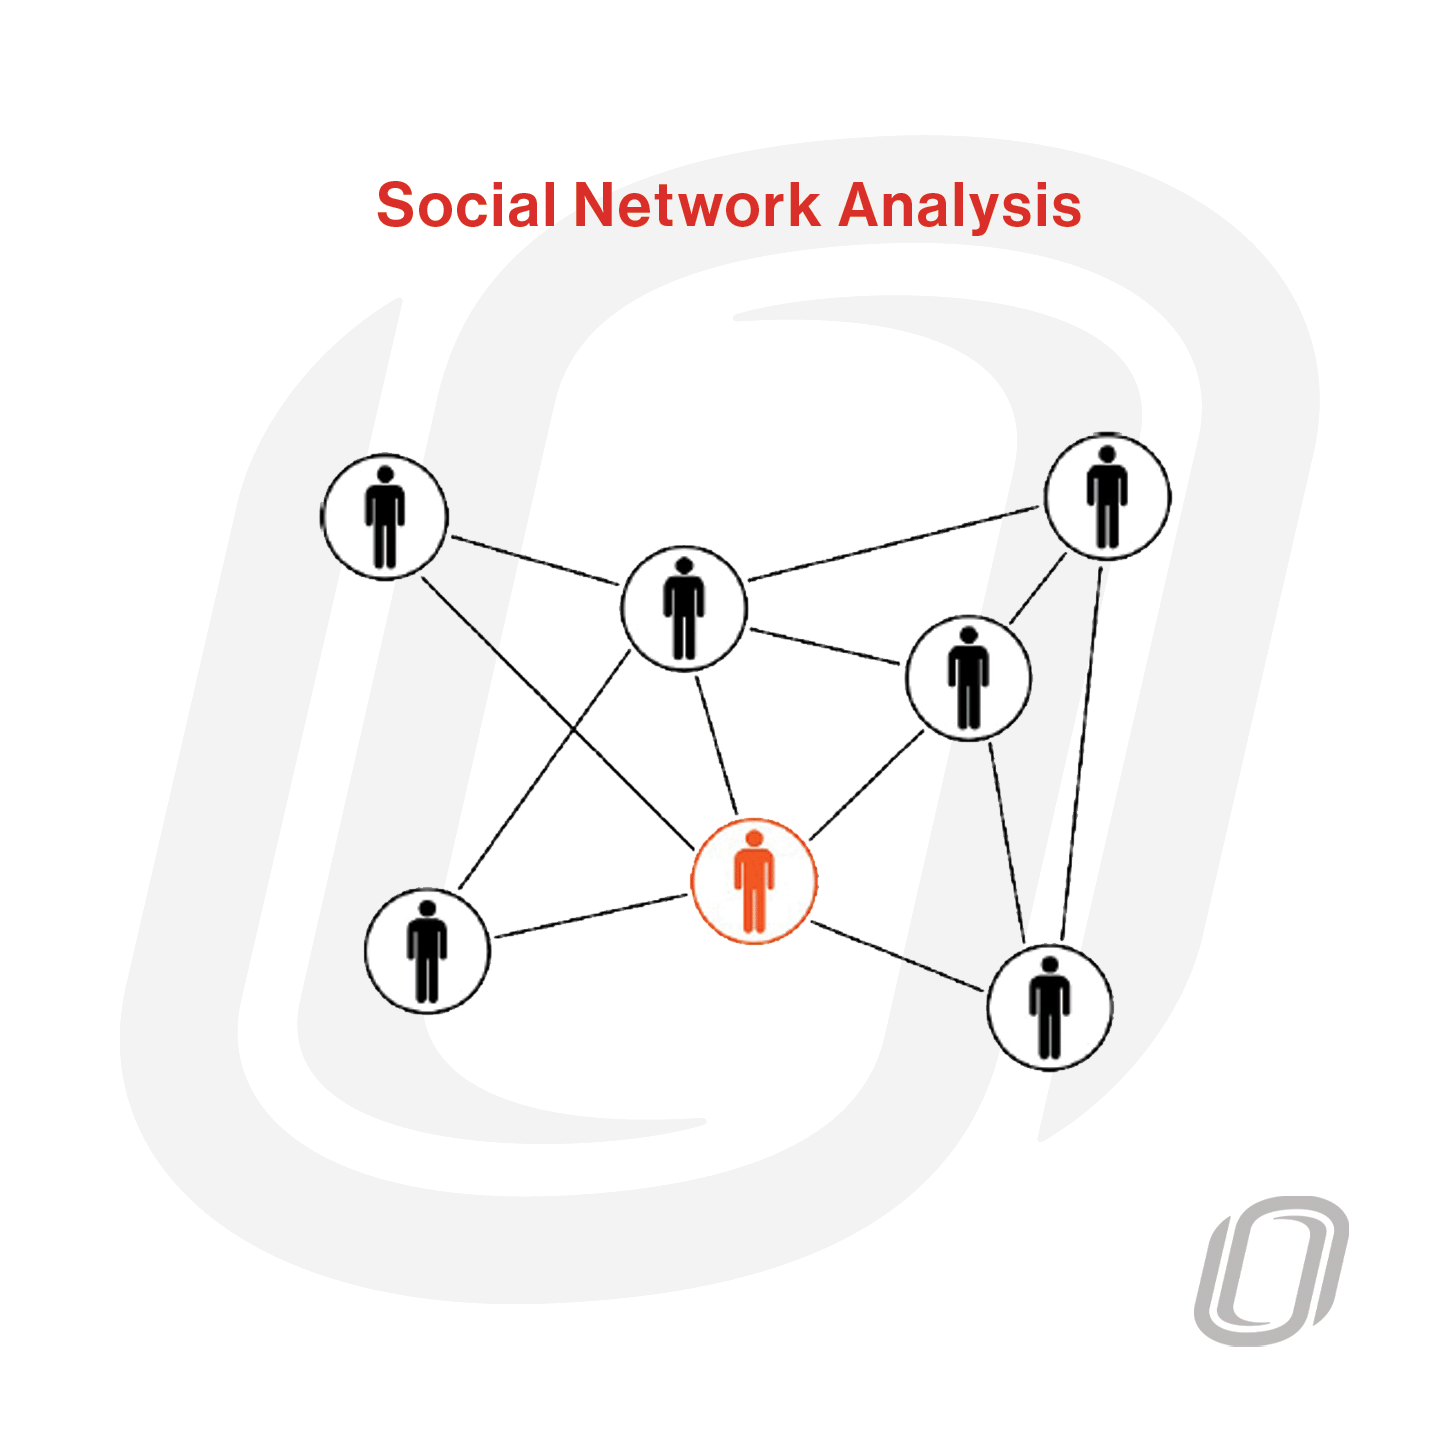 a chart that depicts several interconnected humans depicting social network analysis